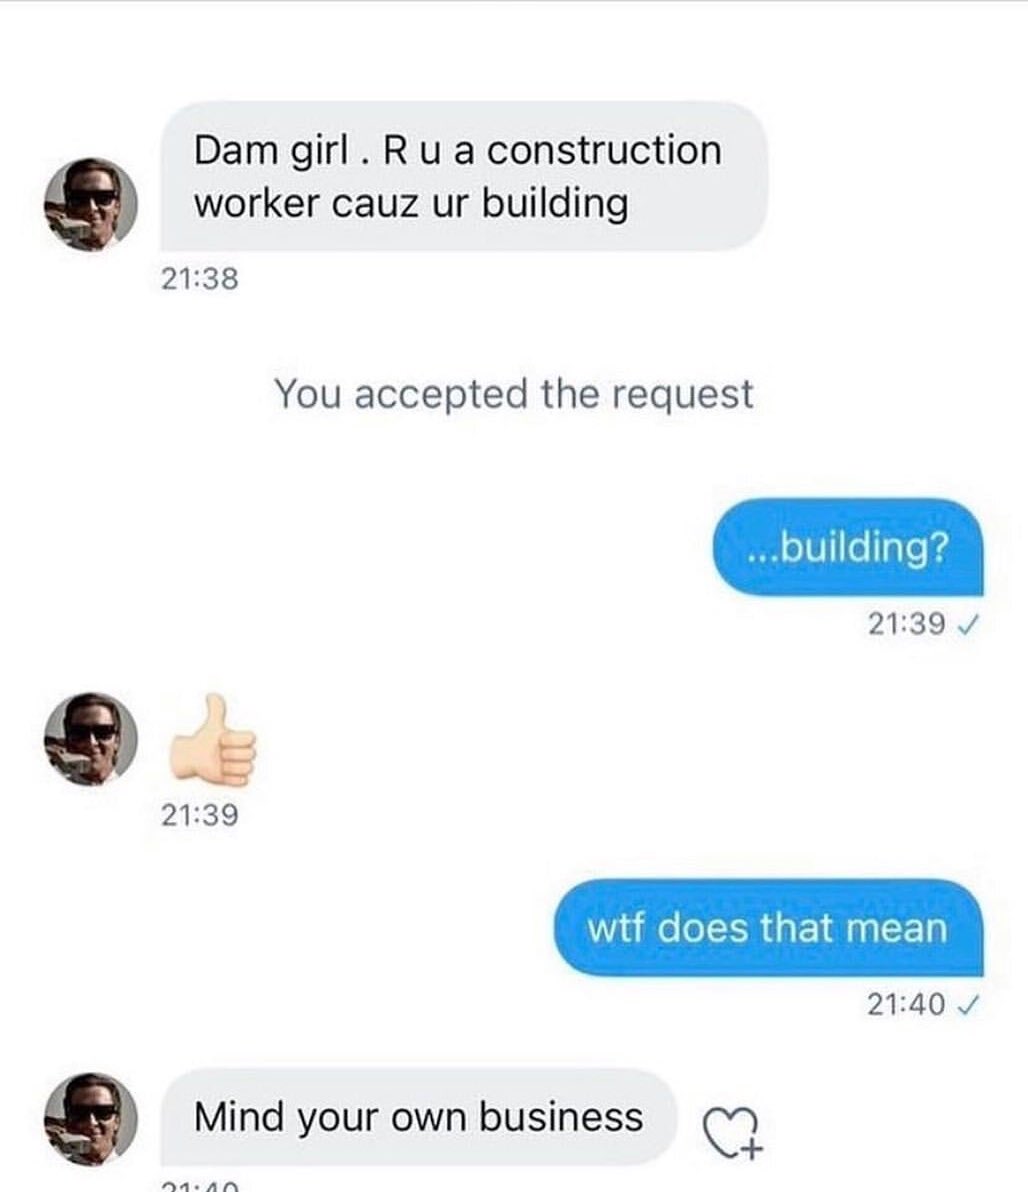 suspicious dms from twitter - media - Dam girl. Ru a construction worker cauz ur building You accepted the request Mind your own business ...building? wtf does that mean